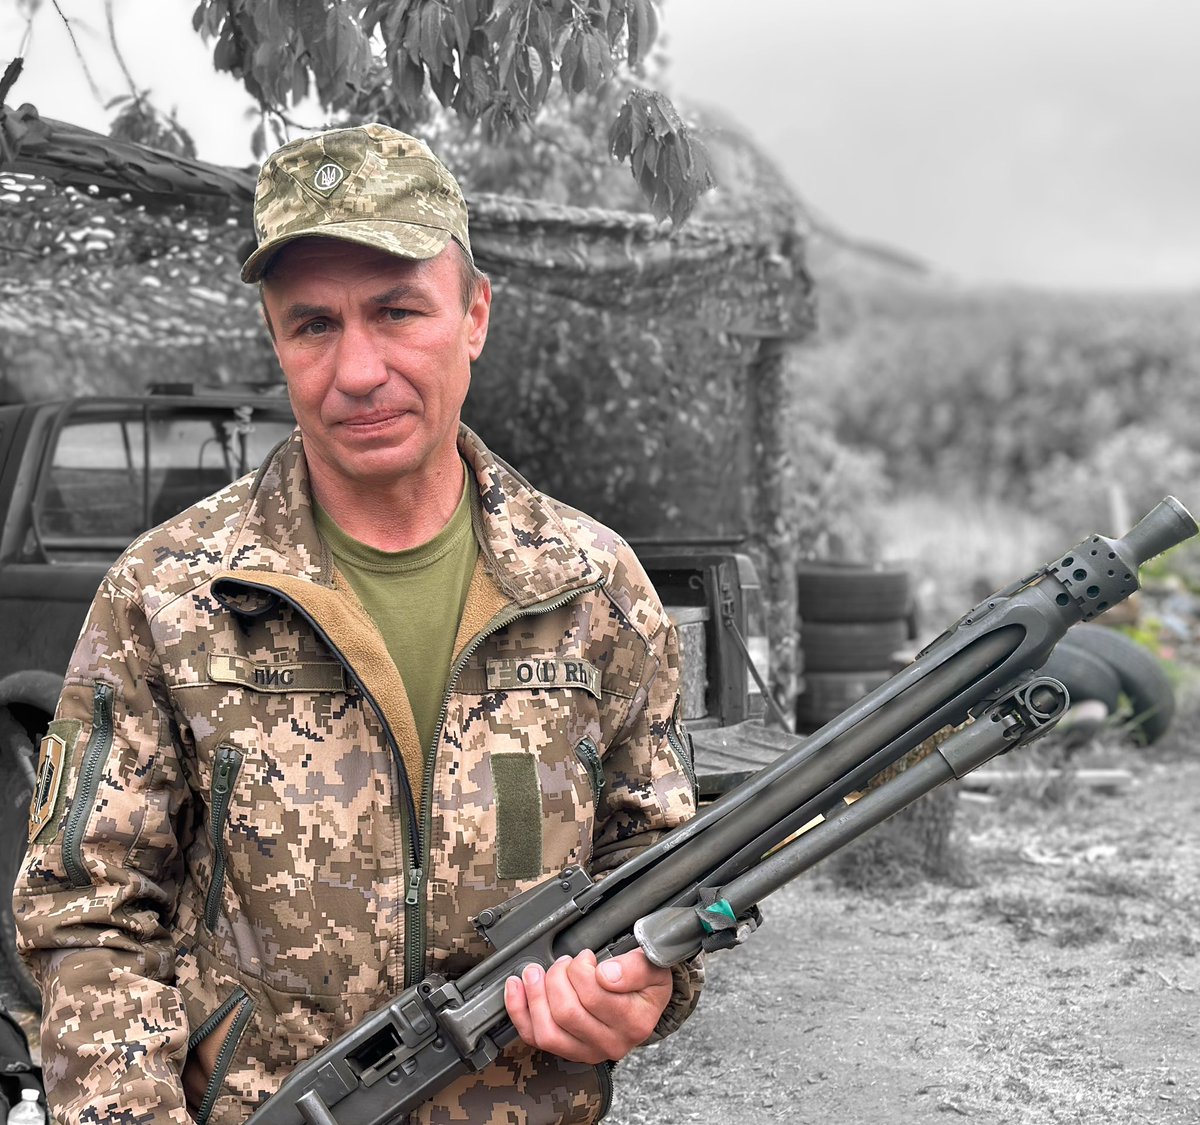 Meet Yura. A 51 yo machine gunner from the 56th Brigade, who was taken captive by russia near Chasiv Yar but escaped back to Ukrainian lines where kept fighting until his position was hit by an FPV. Two days ago he was awarded for his valor and is on his way back to fight.